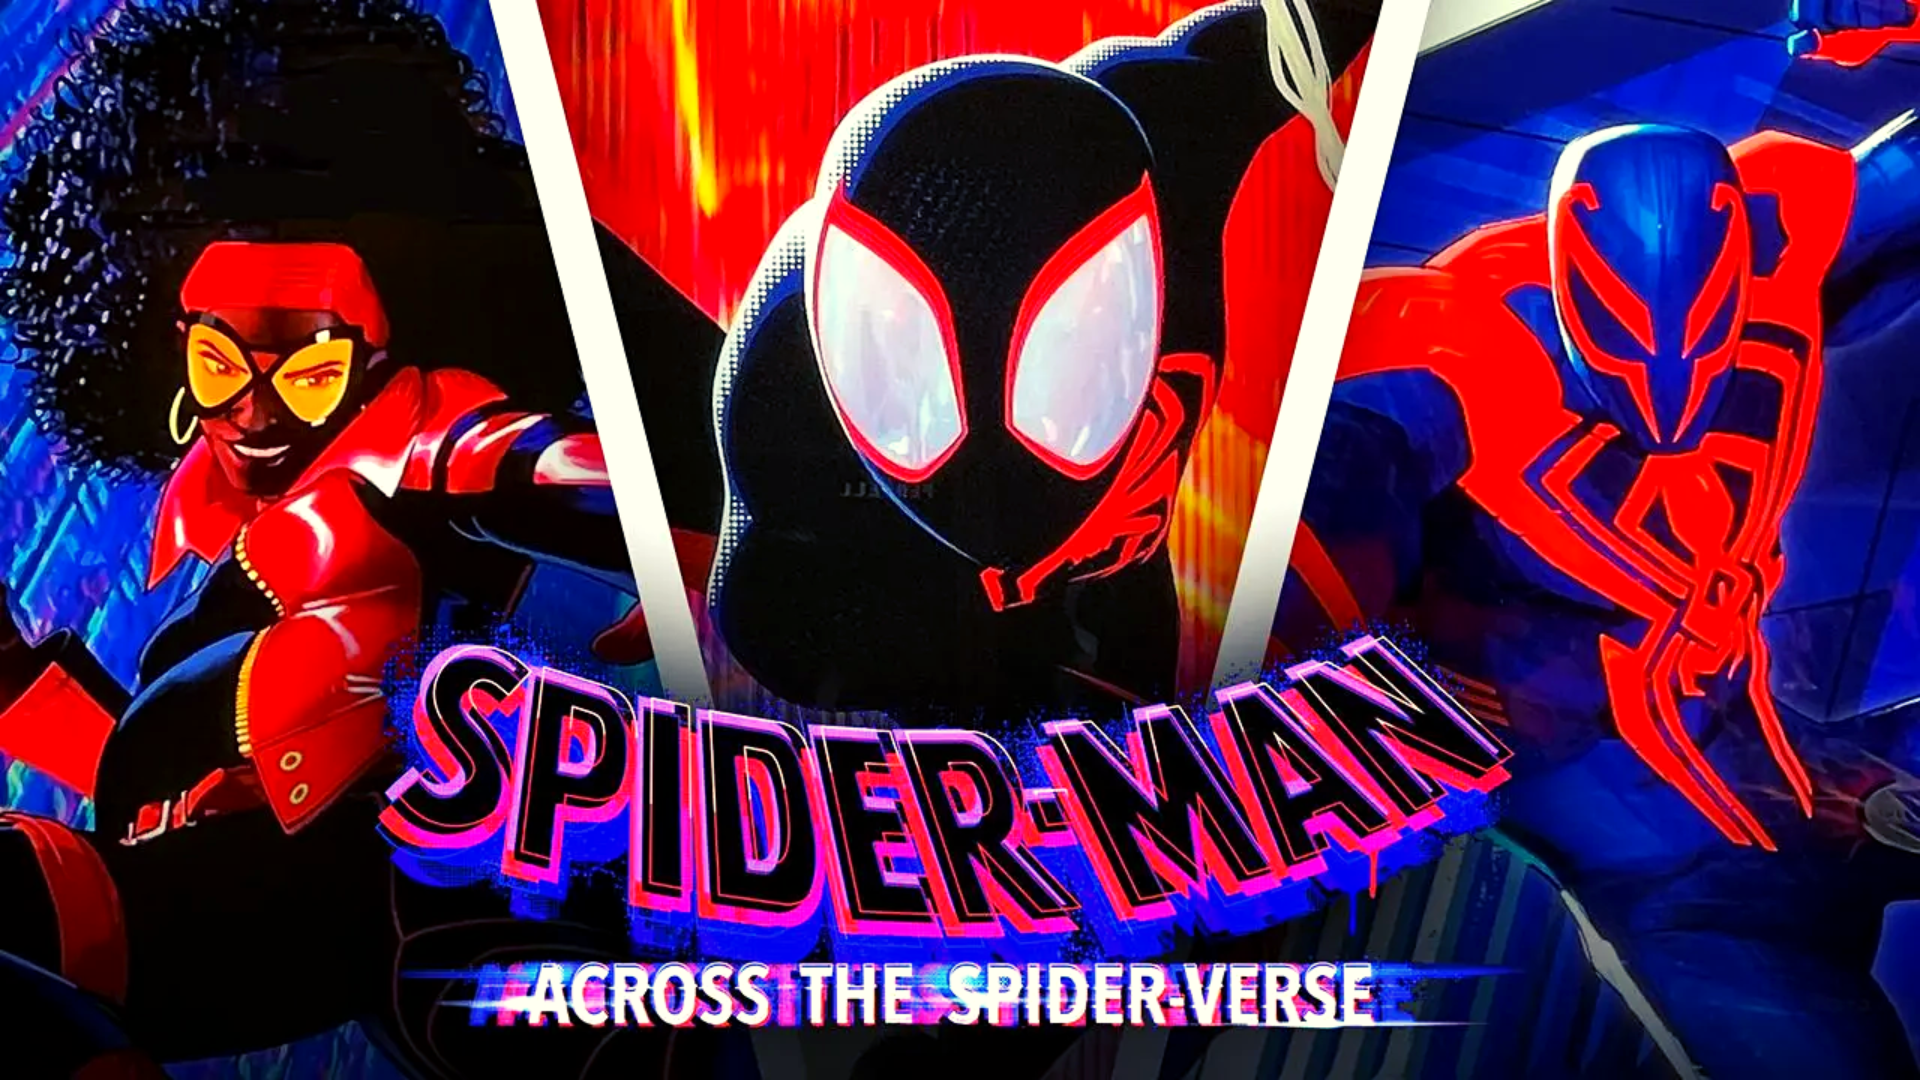 Spiderman Across The Spider-Verse Movie Ticket Offers: Get 60% Off